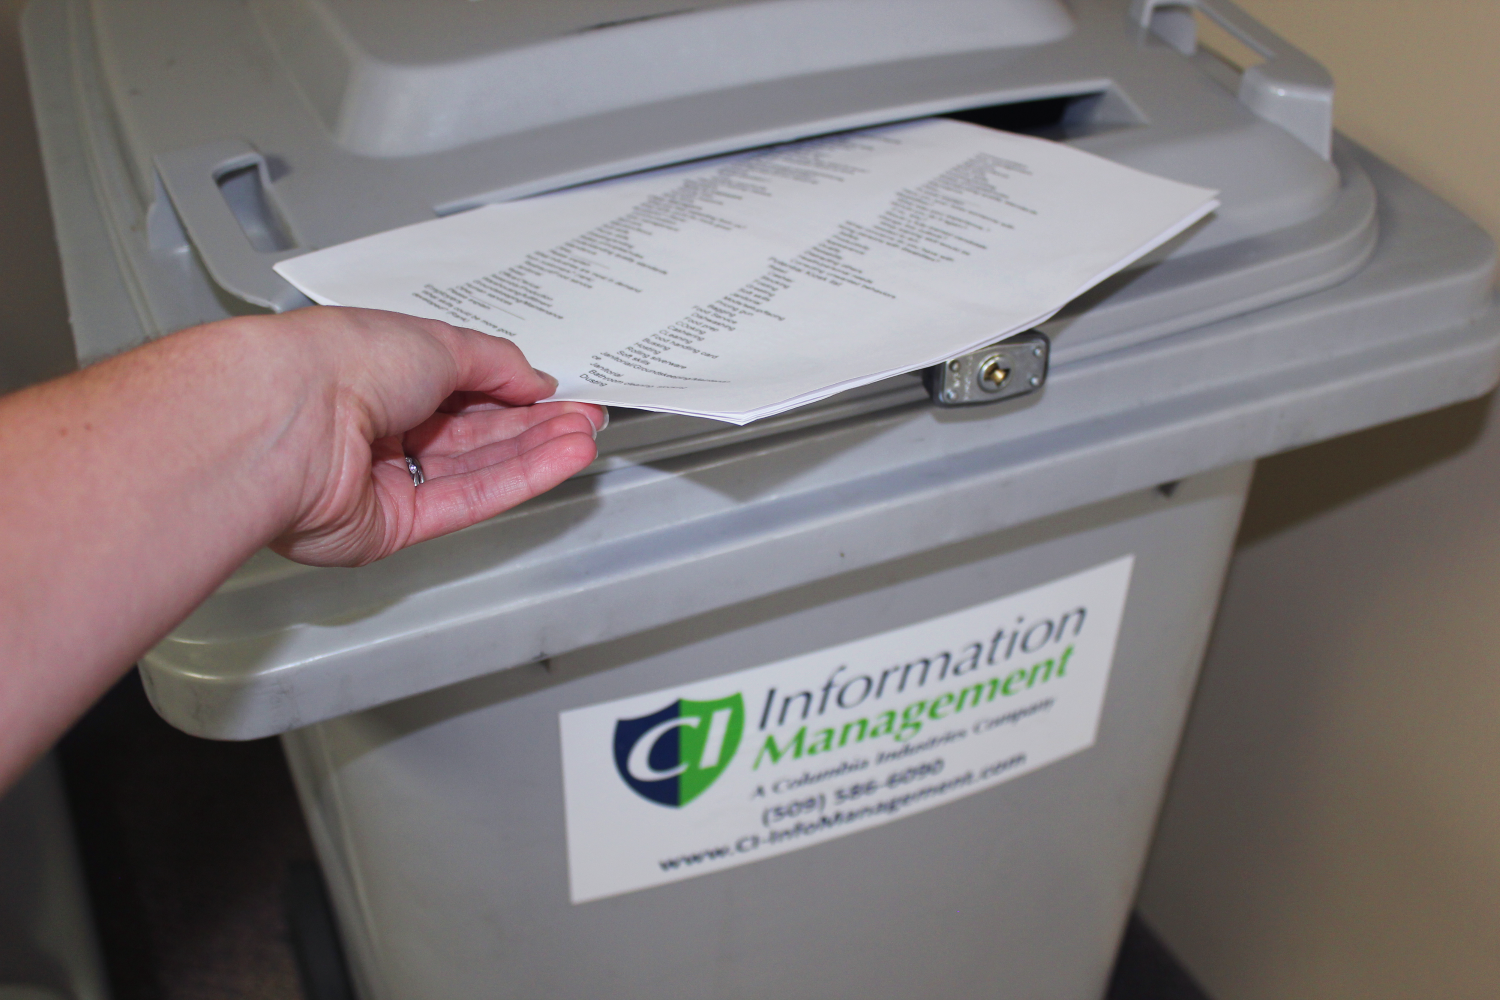 A CI Information Management 32-gallon shred collection bin